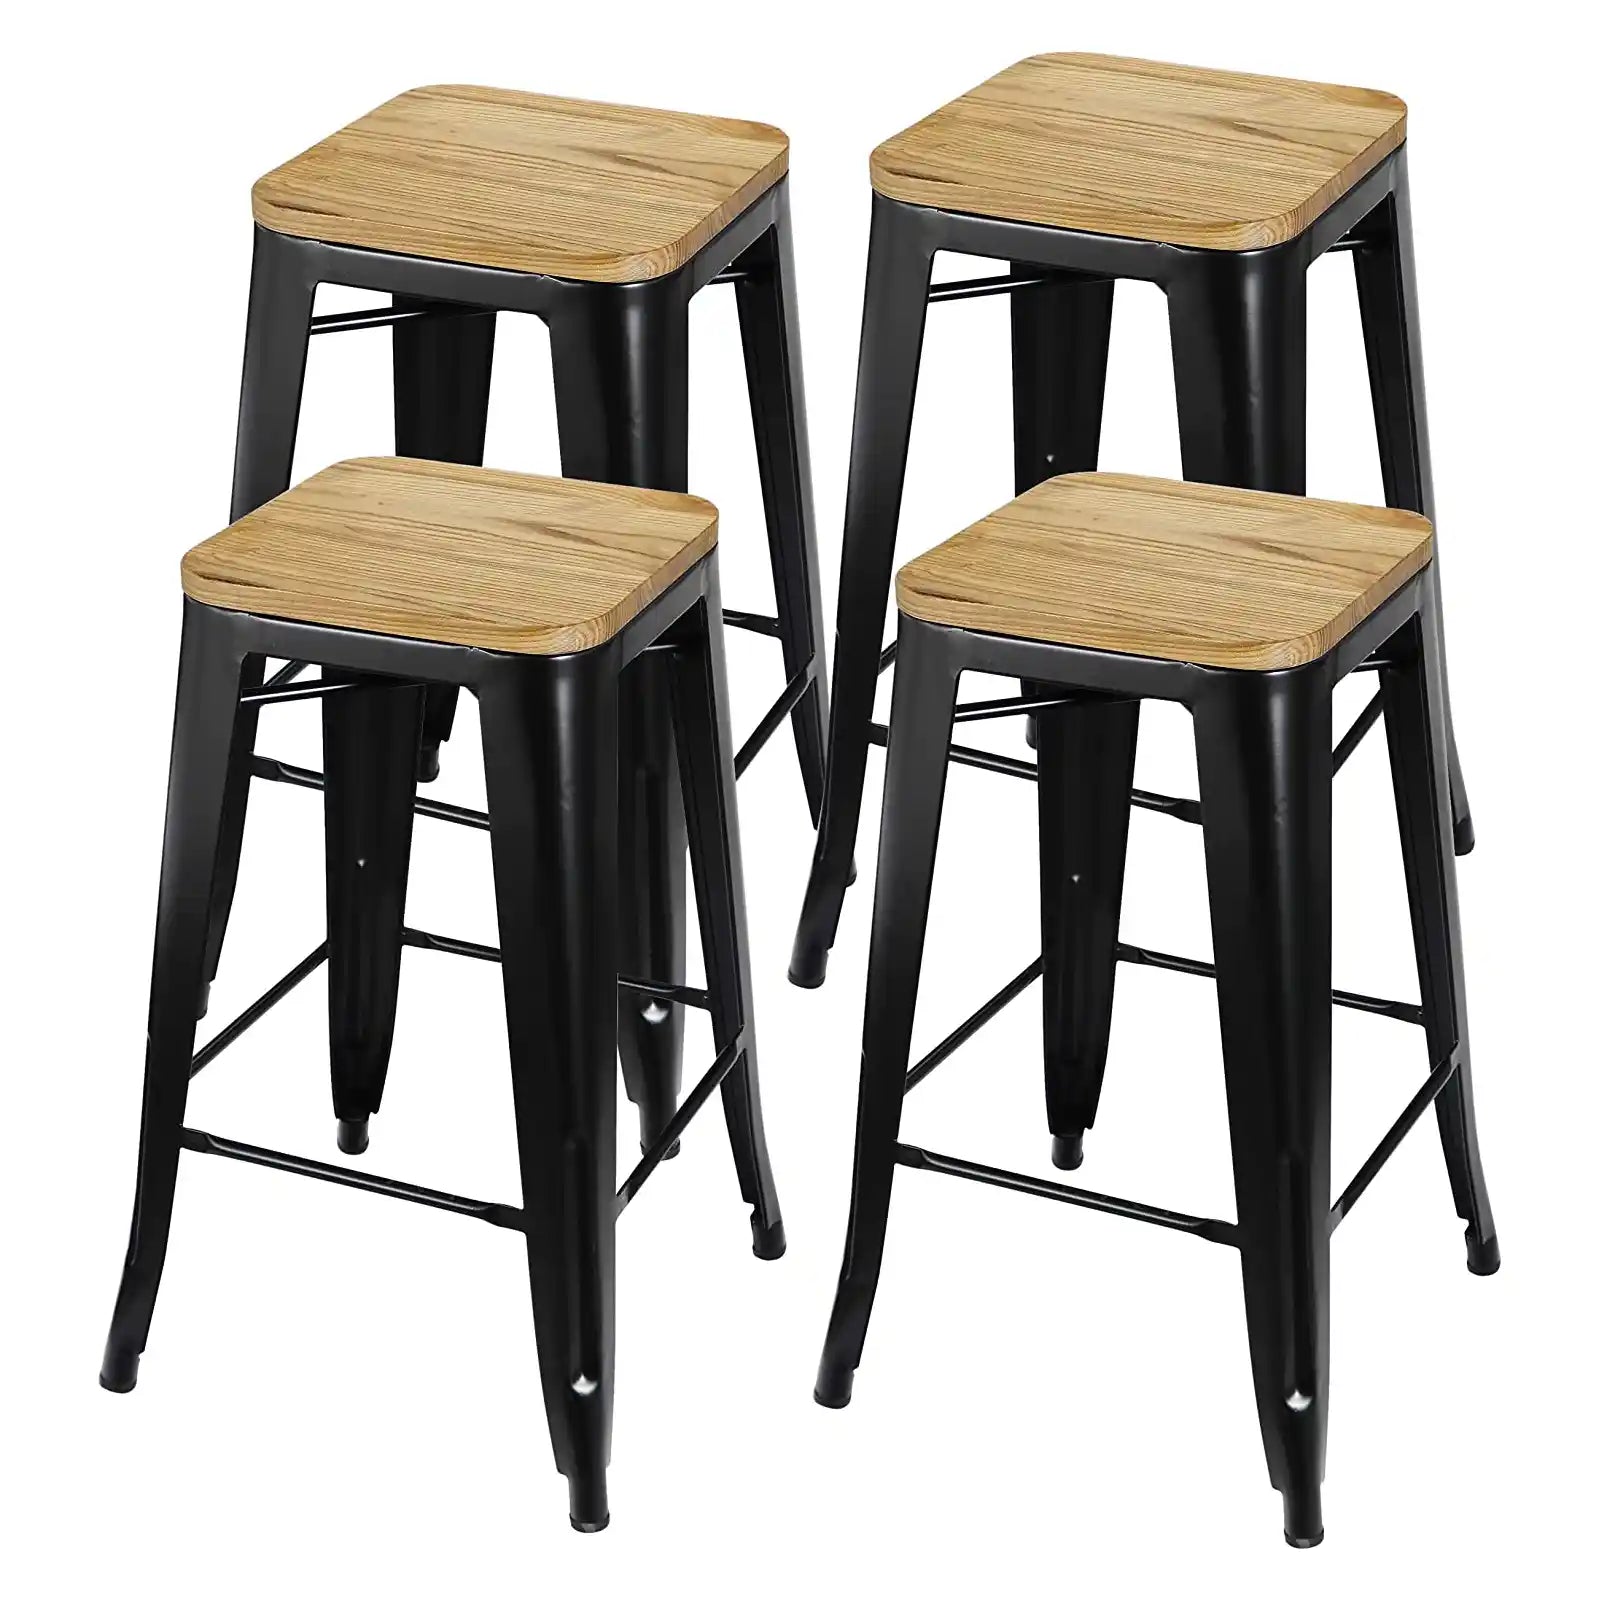 26 Inches Metal Bar Stools Set of 4, Counter Height Barstool Stackable Kitchen Stools